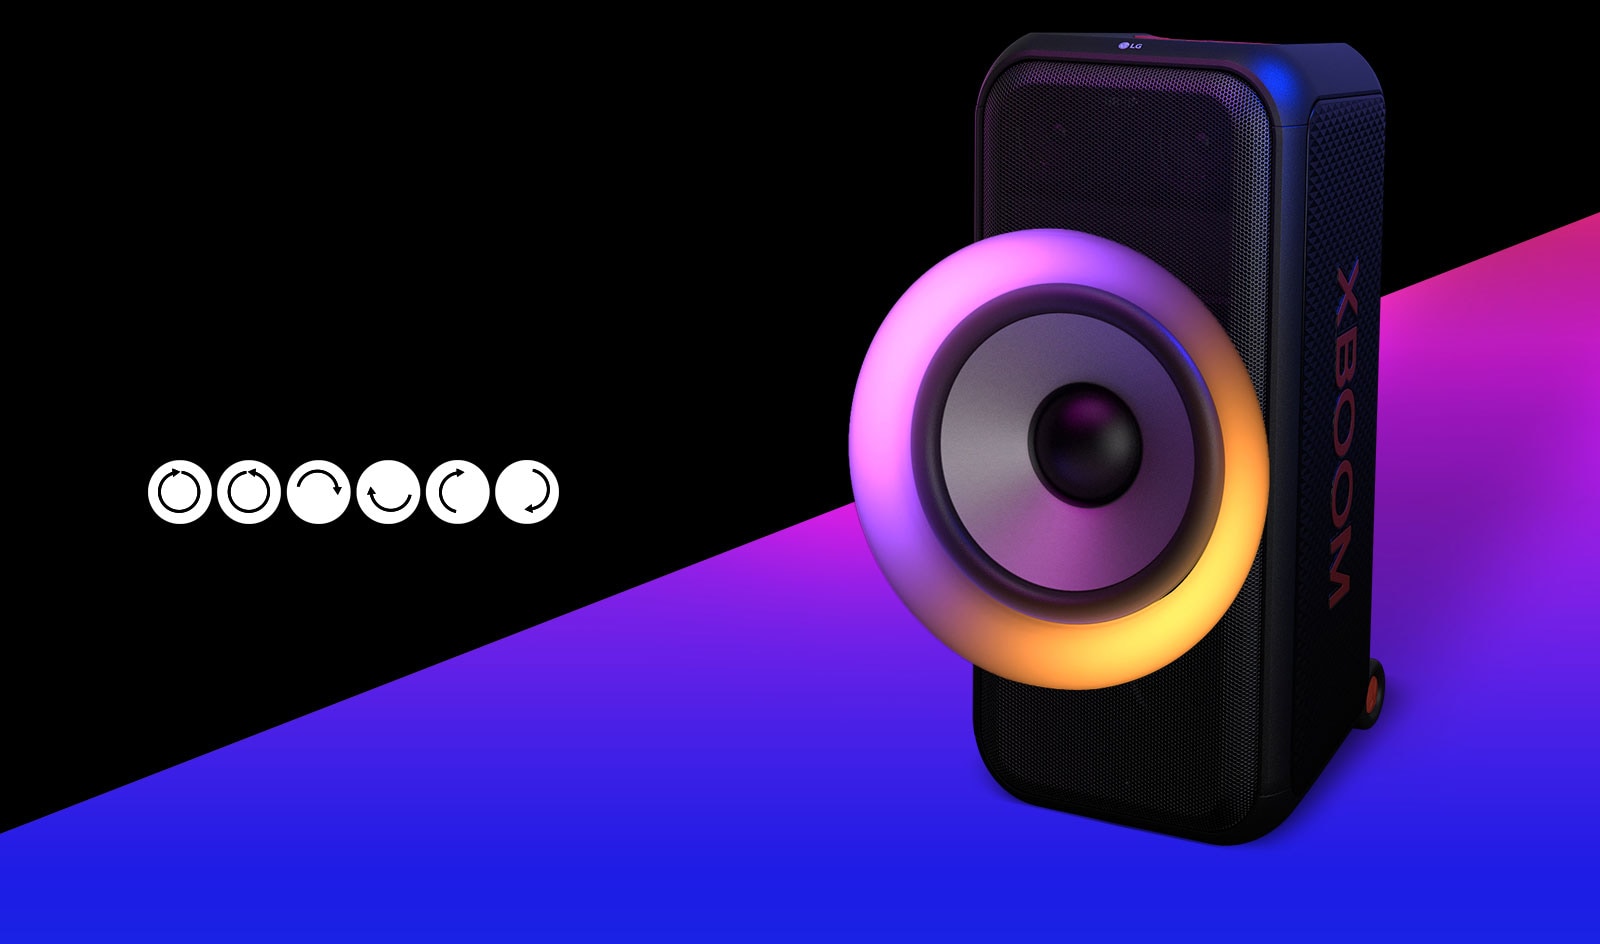 LG XL7S Text is placed on the black colored area, and the pictogram of multi color ring lighting's movements are shown; clockwise, counter-clockwise, upper and lower semicircle, left and right semicircle, and flash effect. The speaker is placed 45 degree angle to the left. And there is purple gradient colored area underneath for design purpose. 8-inch woofer is exaggerated in order to highlight its various colors.